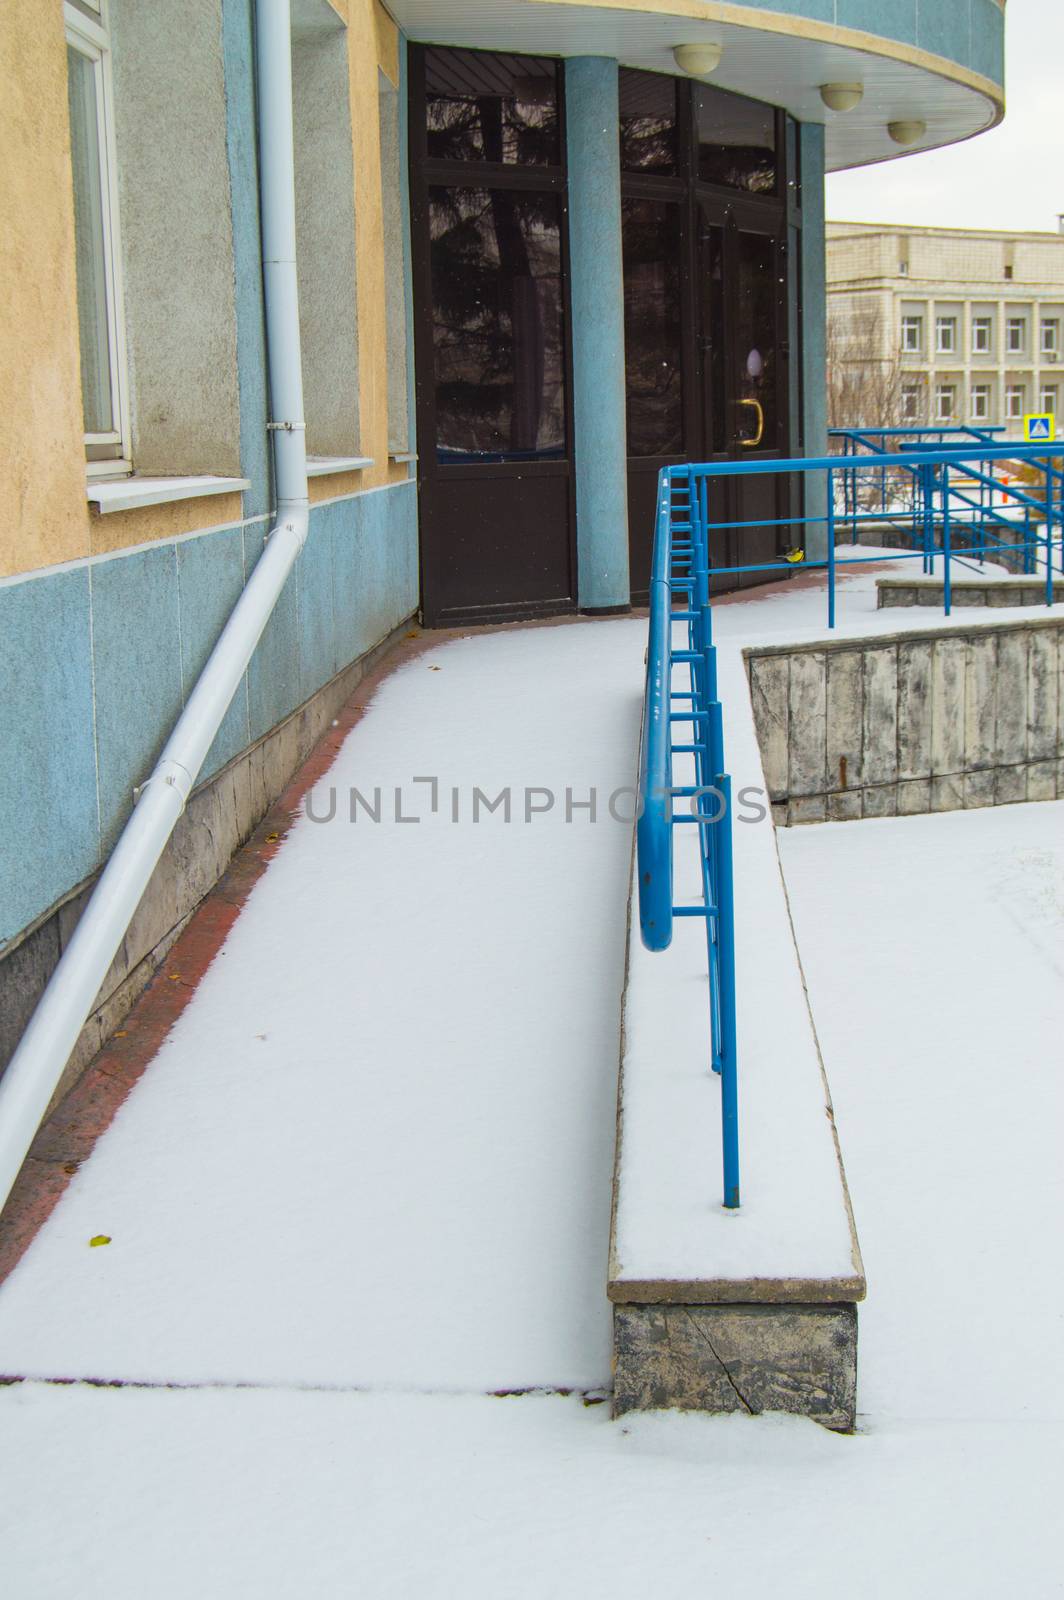 The ramp is covered with the first snow installed for the movement of people with disabilities at any time of the year.